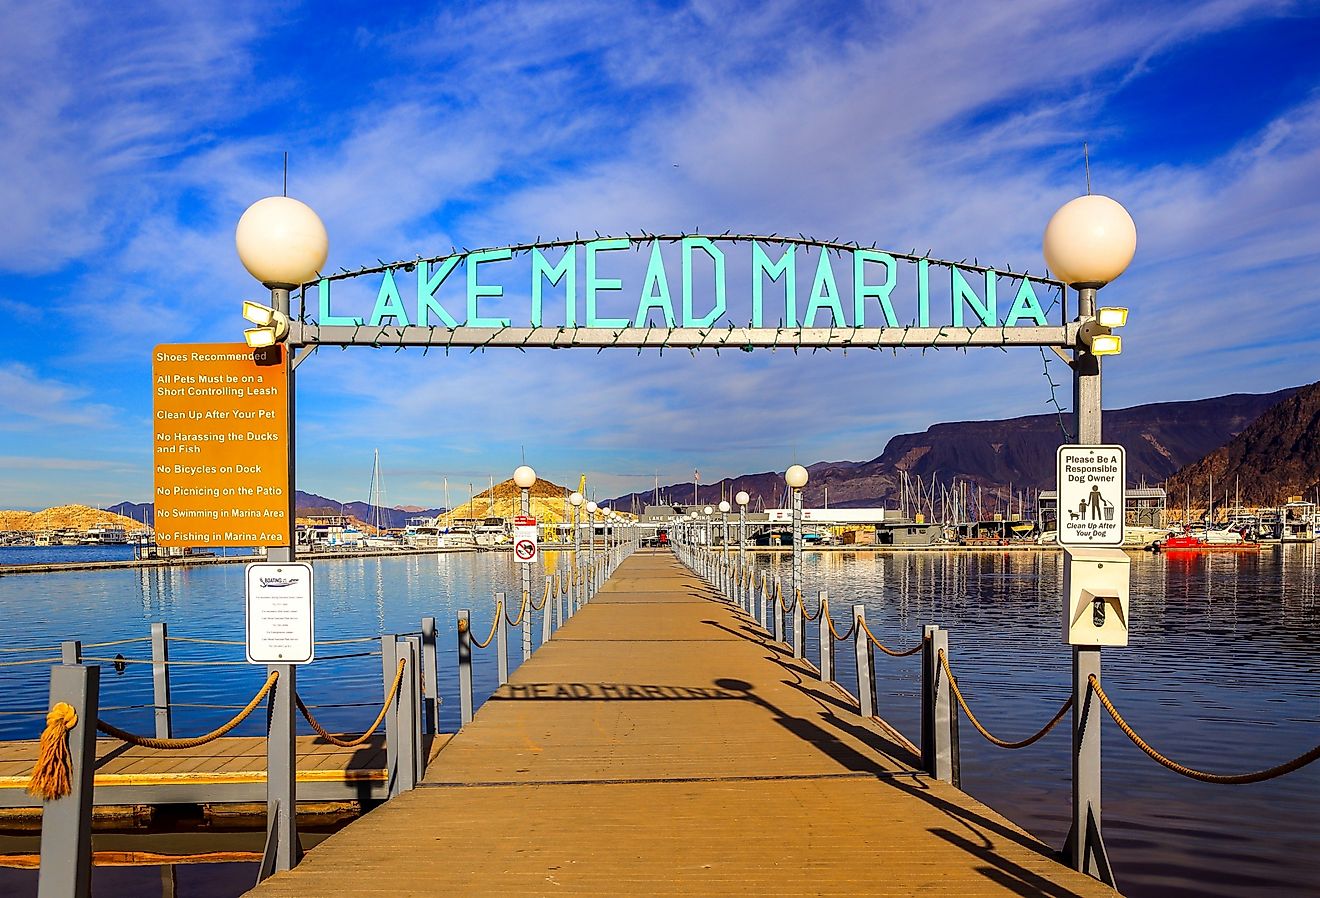 Entrance to Lake Mead Marina of Lake Mead National Recreation Area in Boulder City, Nevada. Image credit Nadia Yong via Shutterstock.